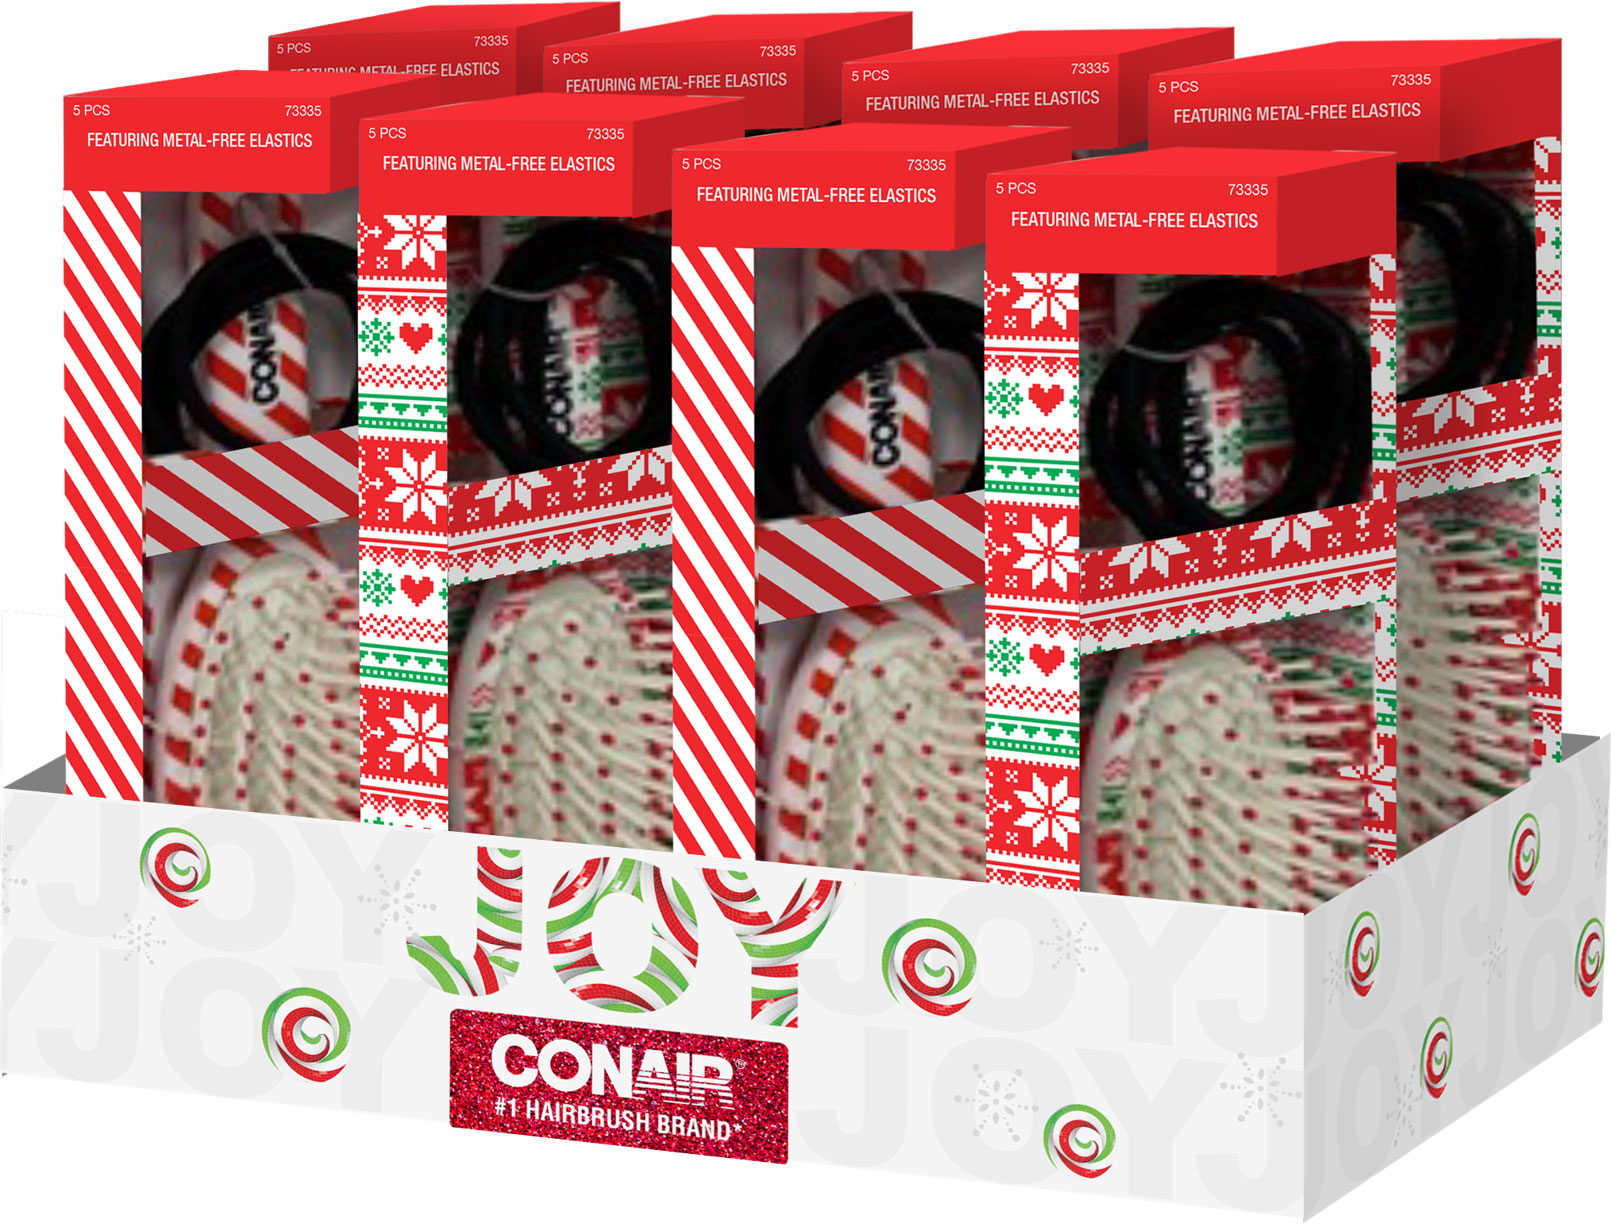 CONAIR 8 PC COUNTER DISPLAY OF MID SIZE HOLIDAY PRINT BRUSH (73334; 73335)